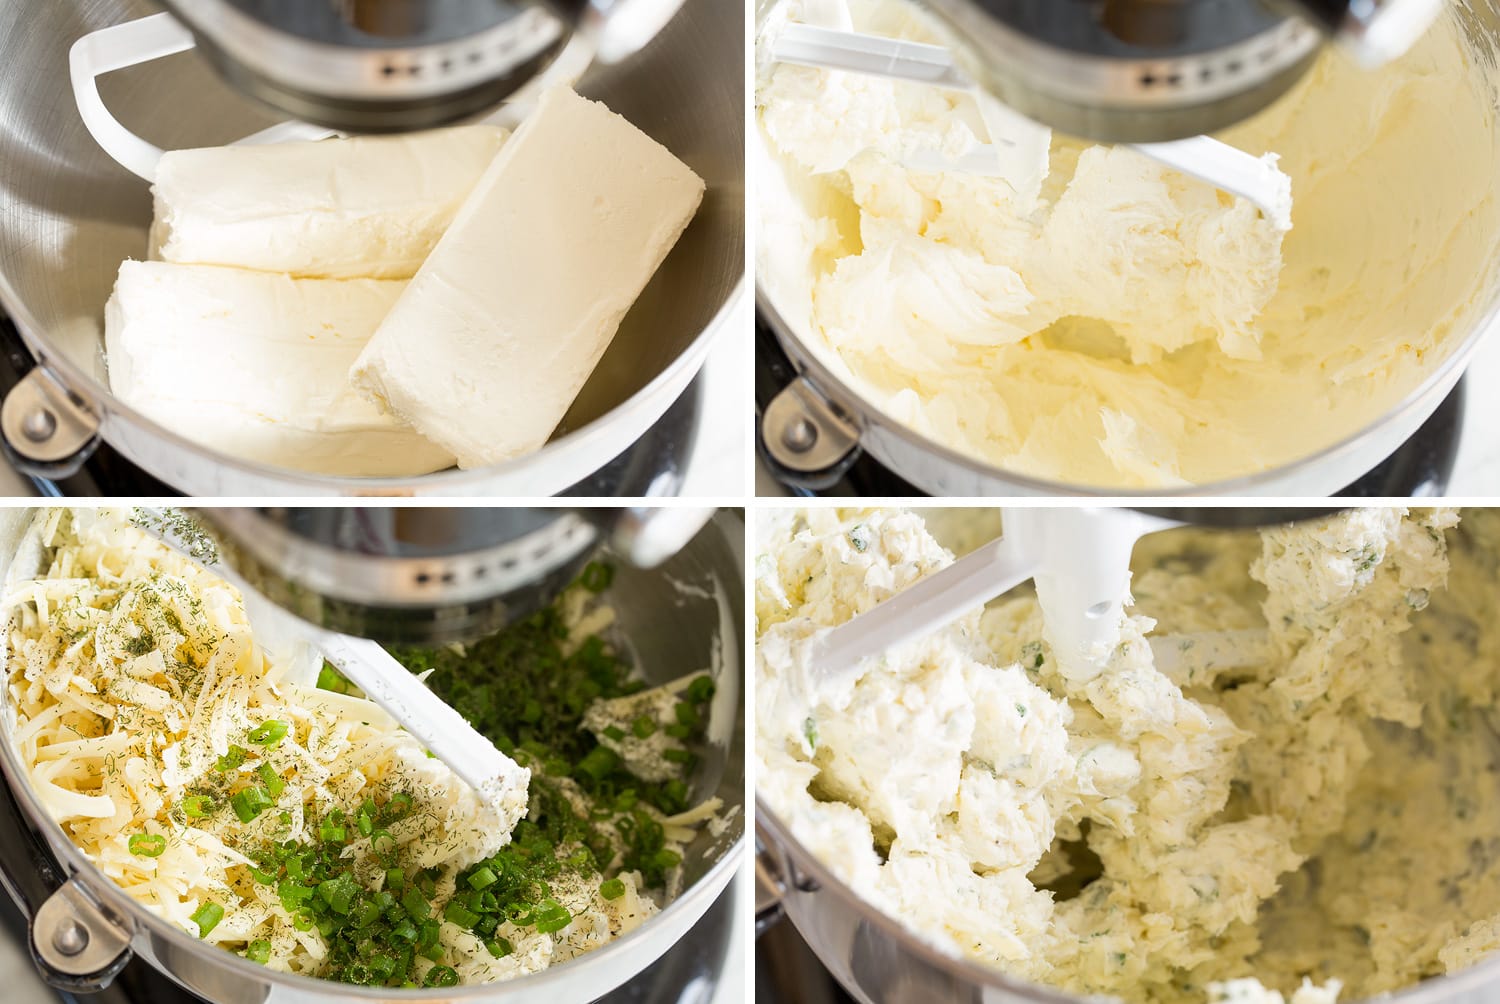 Steps of making cheese ball mix in a food processor with cream cheese, grated cheese and herbs.